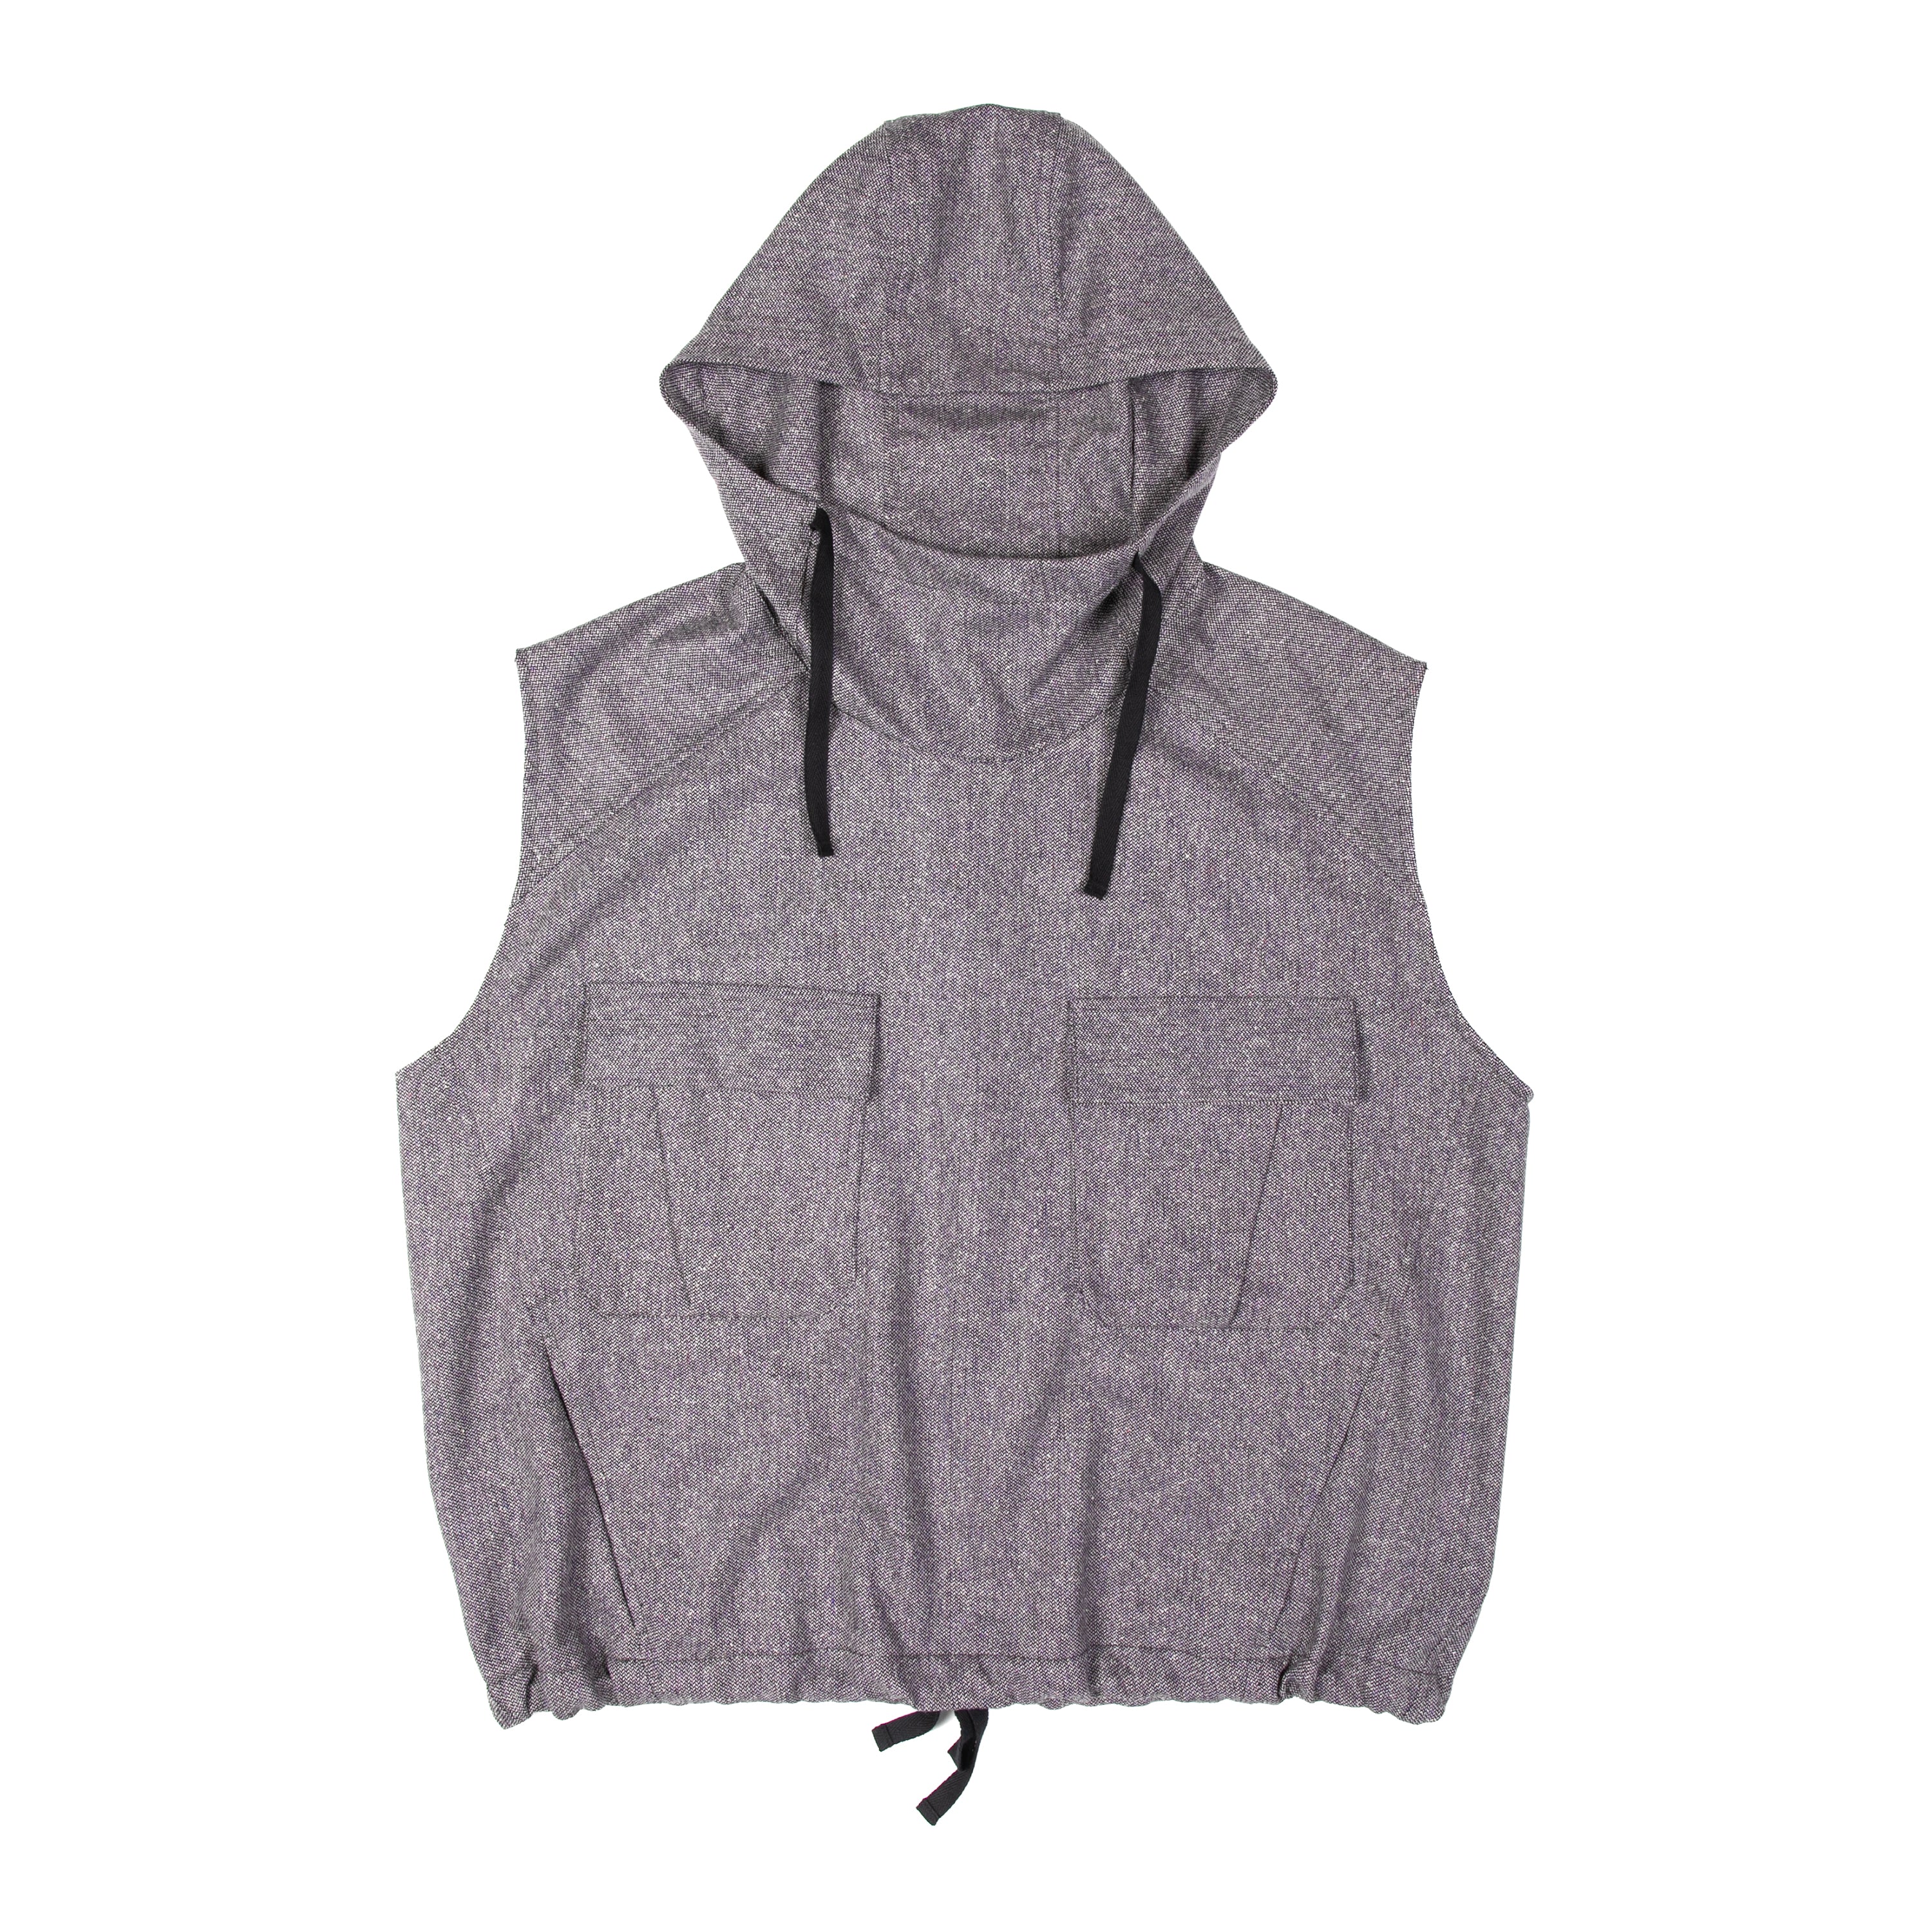 Army Smock Vest Donegal Wool Purple - PREORDER